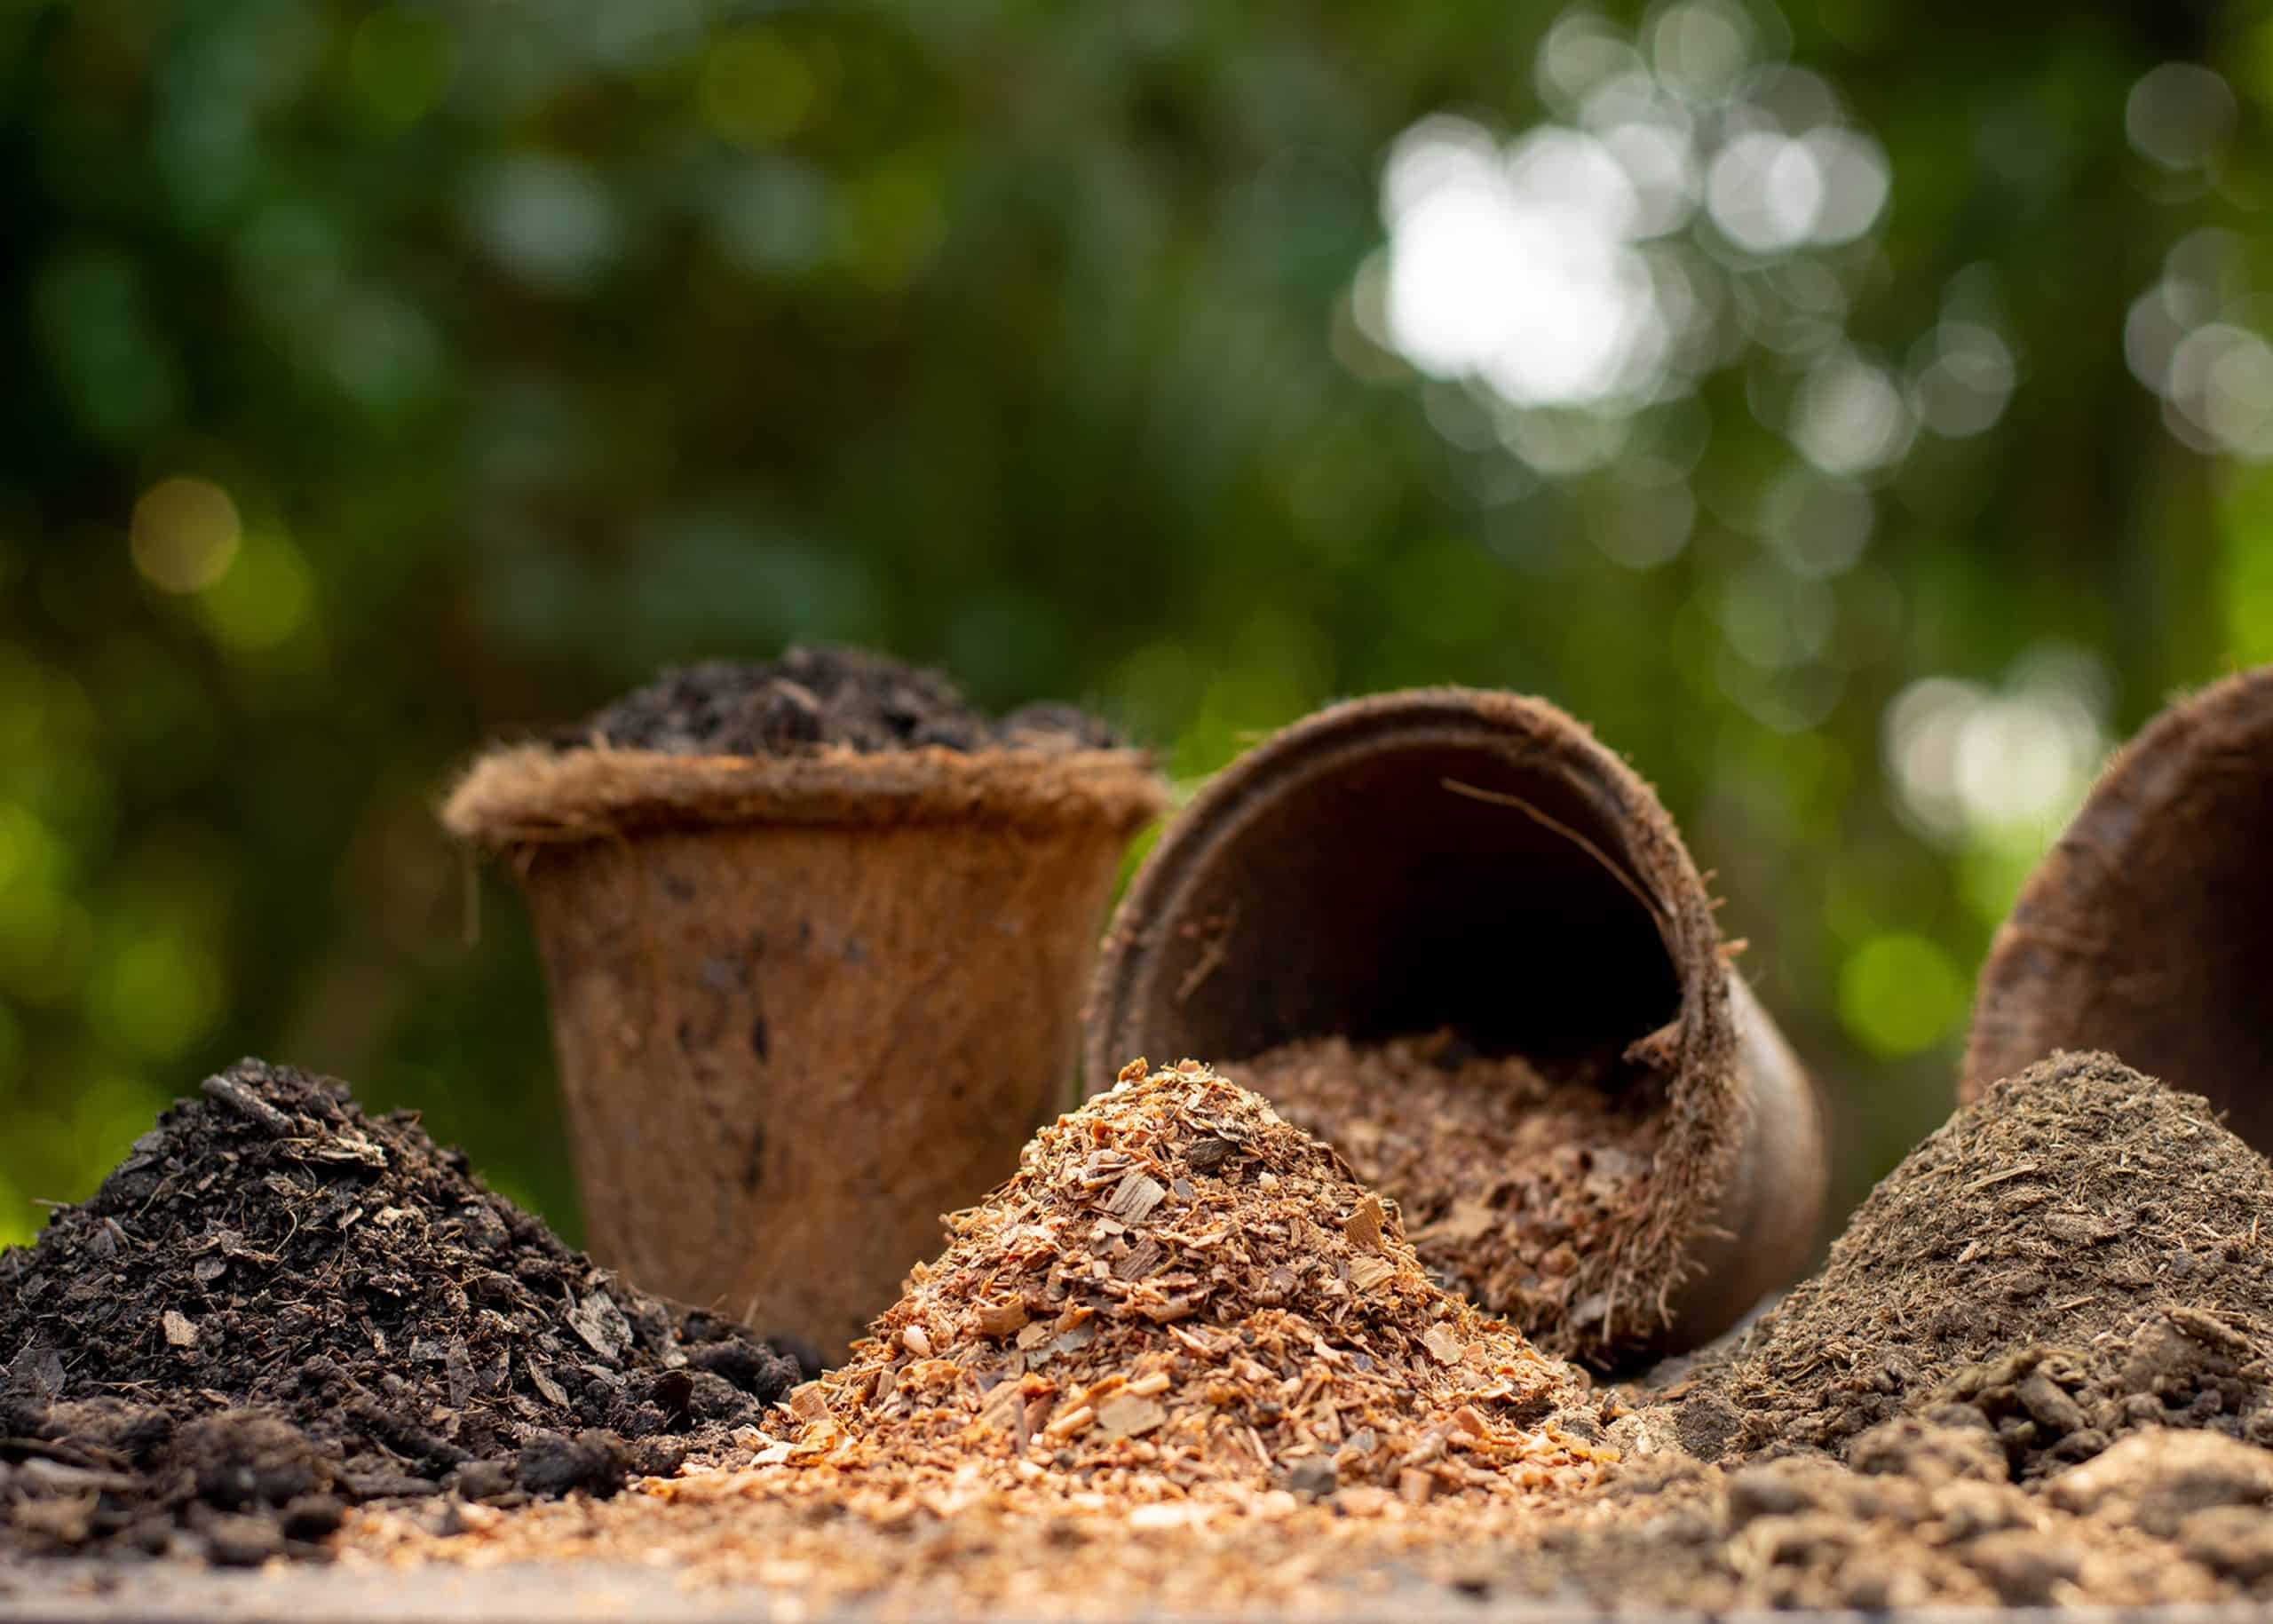 bone meal benefits for organic gardening as manure and compost